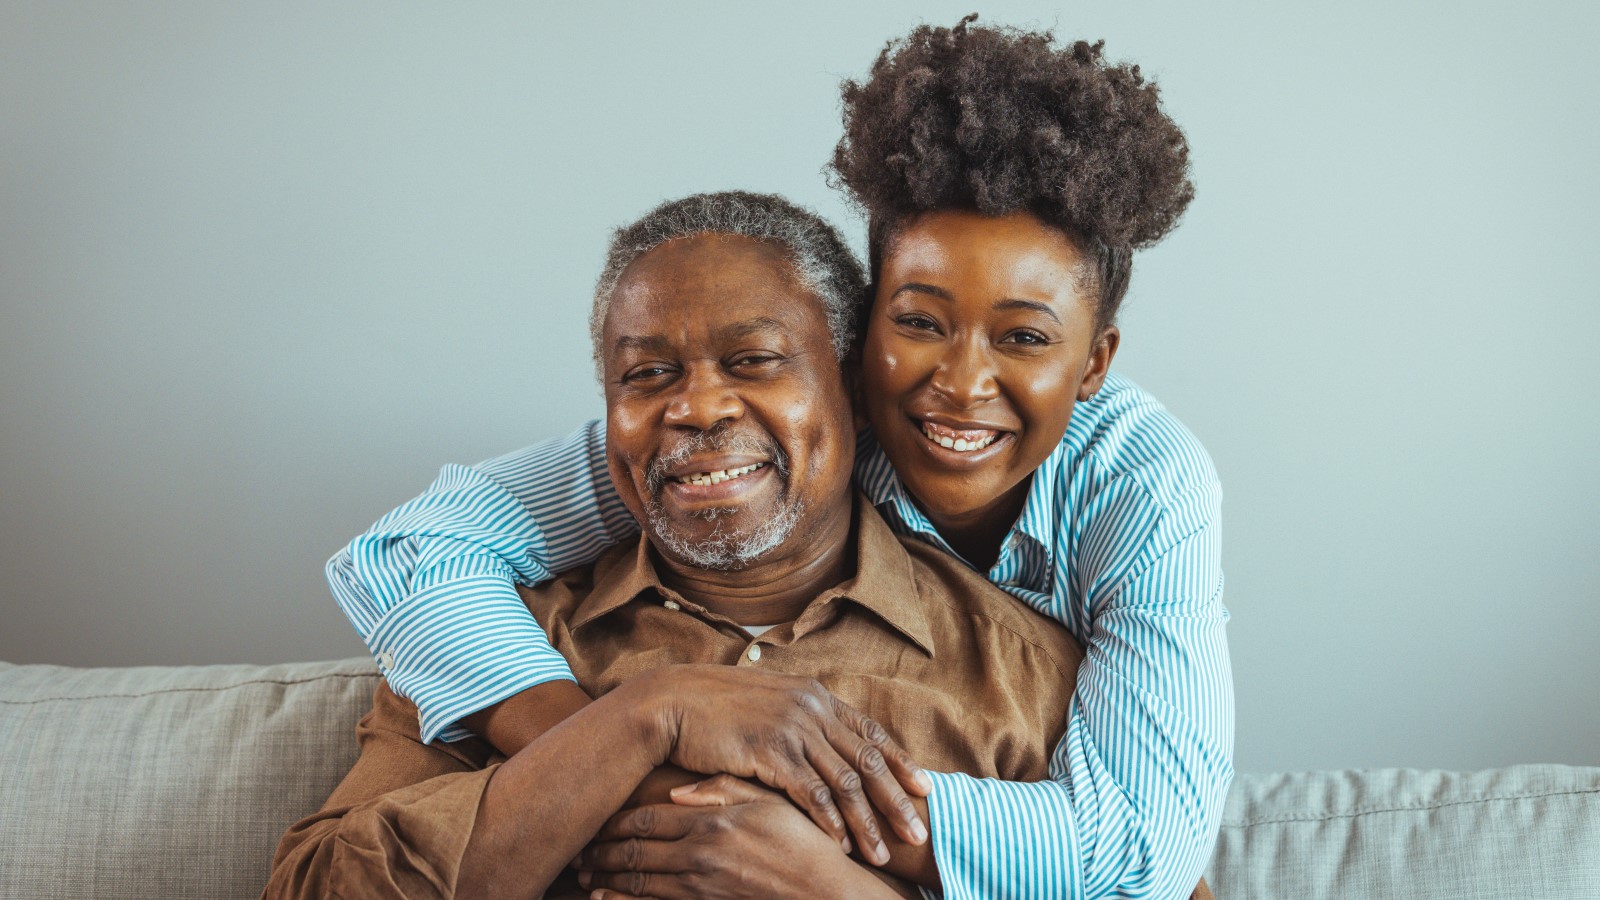 Top Seven Tips for Caring for Elderly Parents at Home